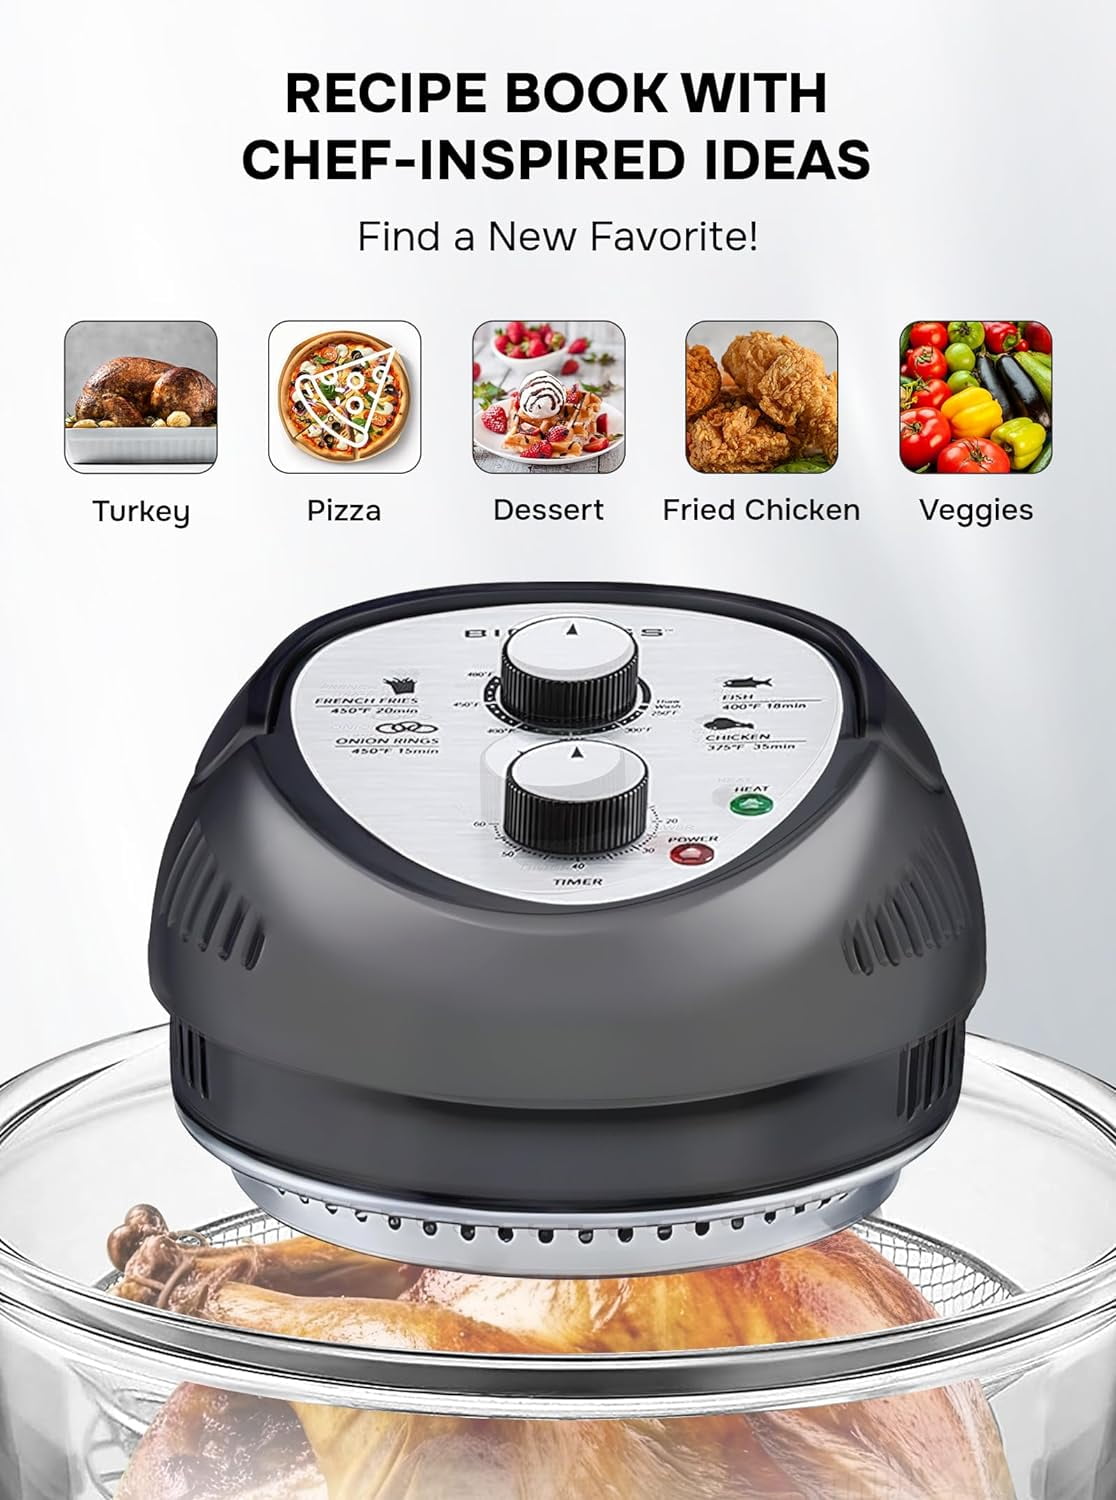 Big Boss 16Qt Large Air Fryer Oven – Extra Large Halogen Oven Cooker with  50+ Air Fryers Recipe Book for Quick + Easy Meals for Entire Family